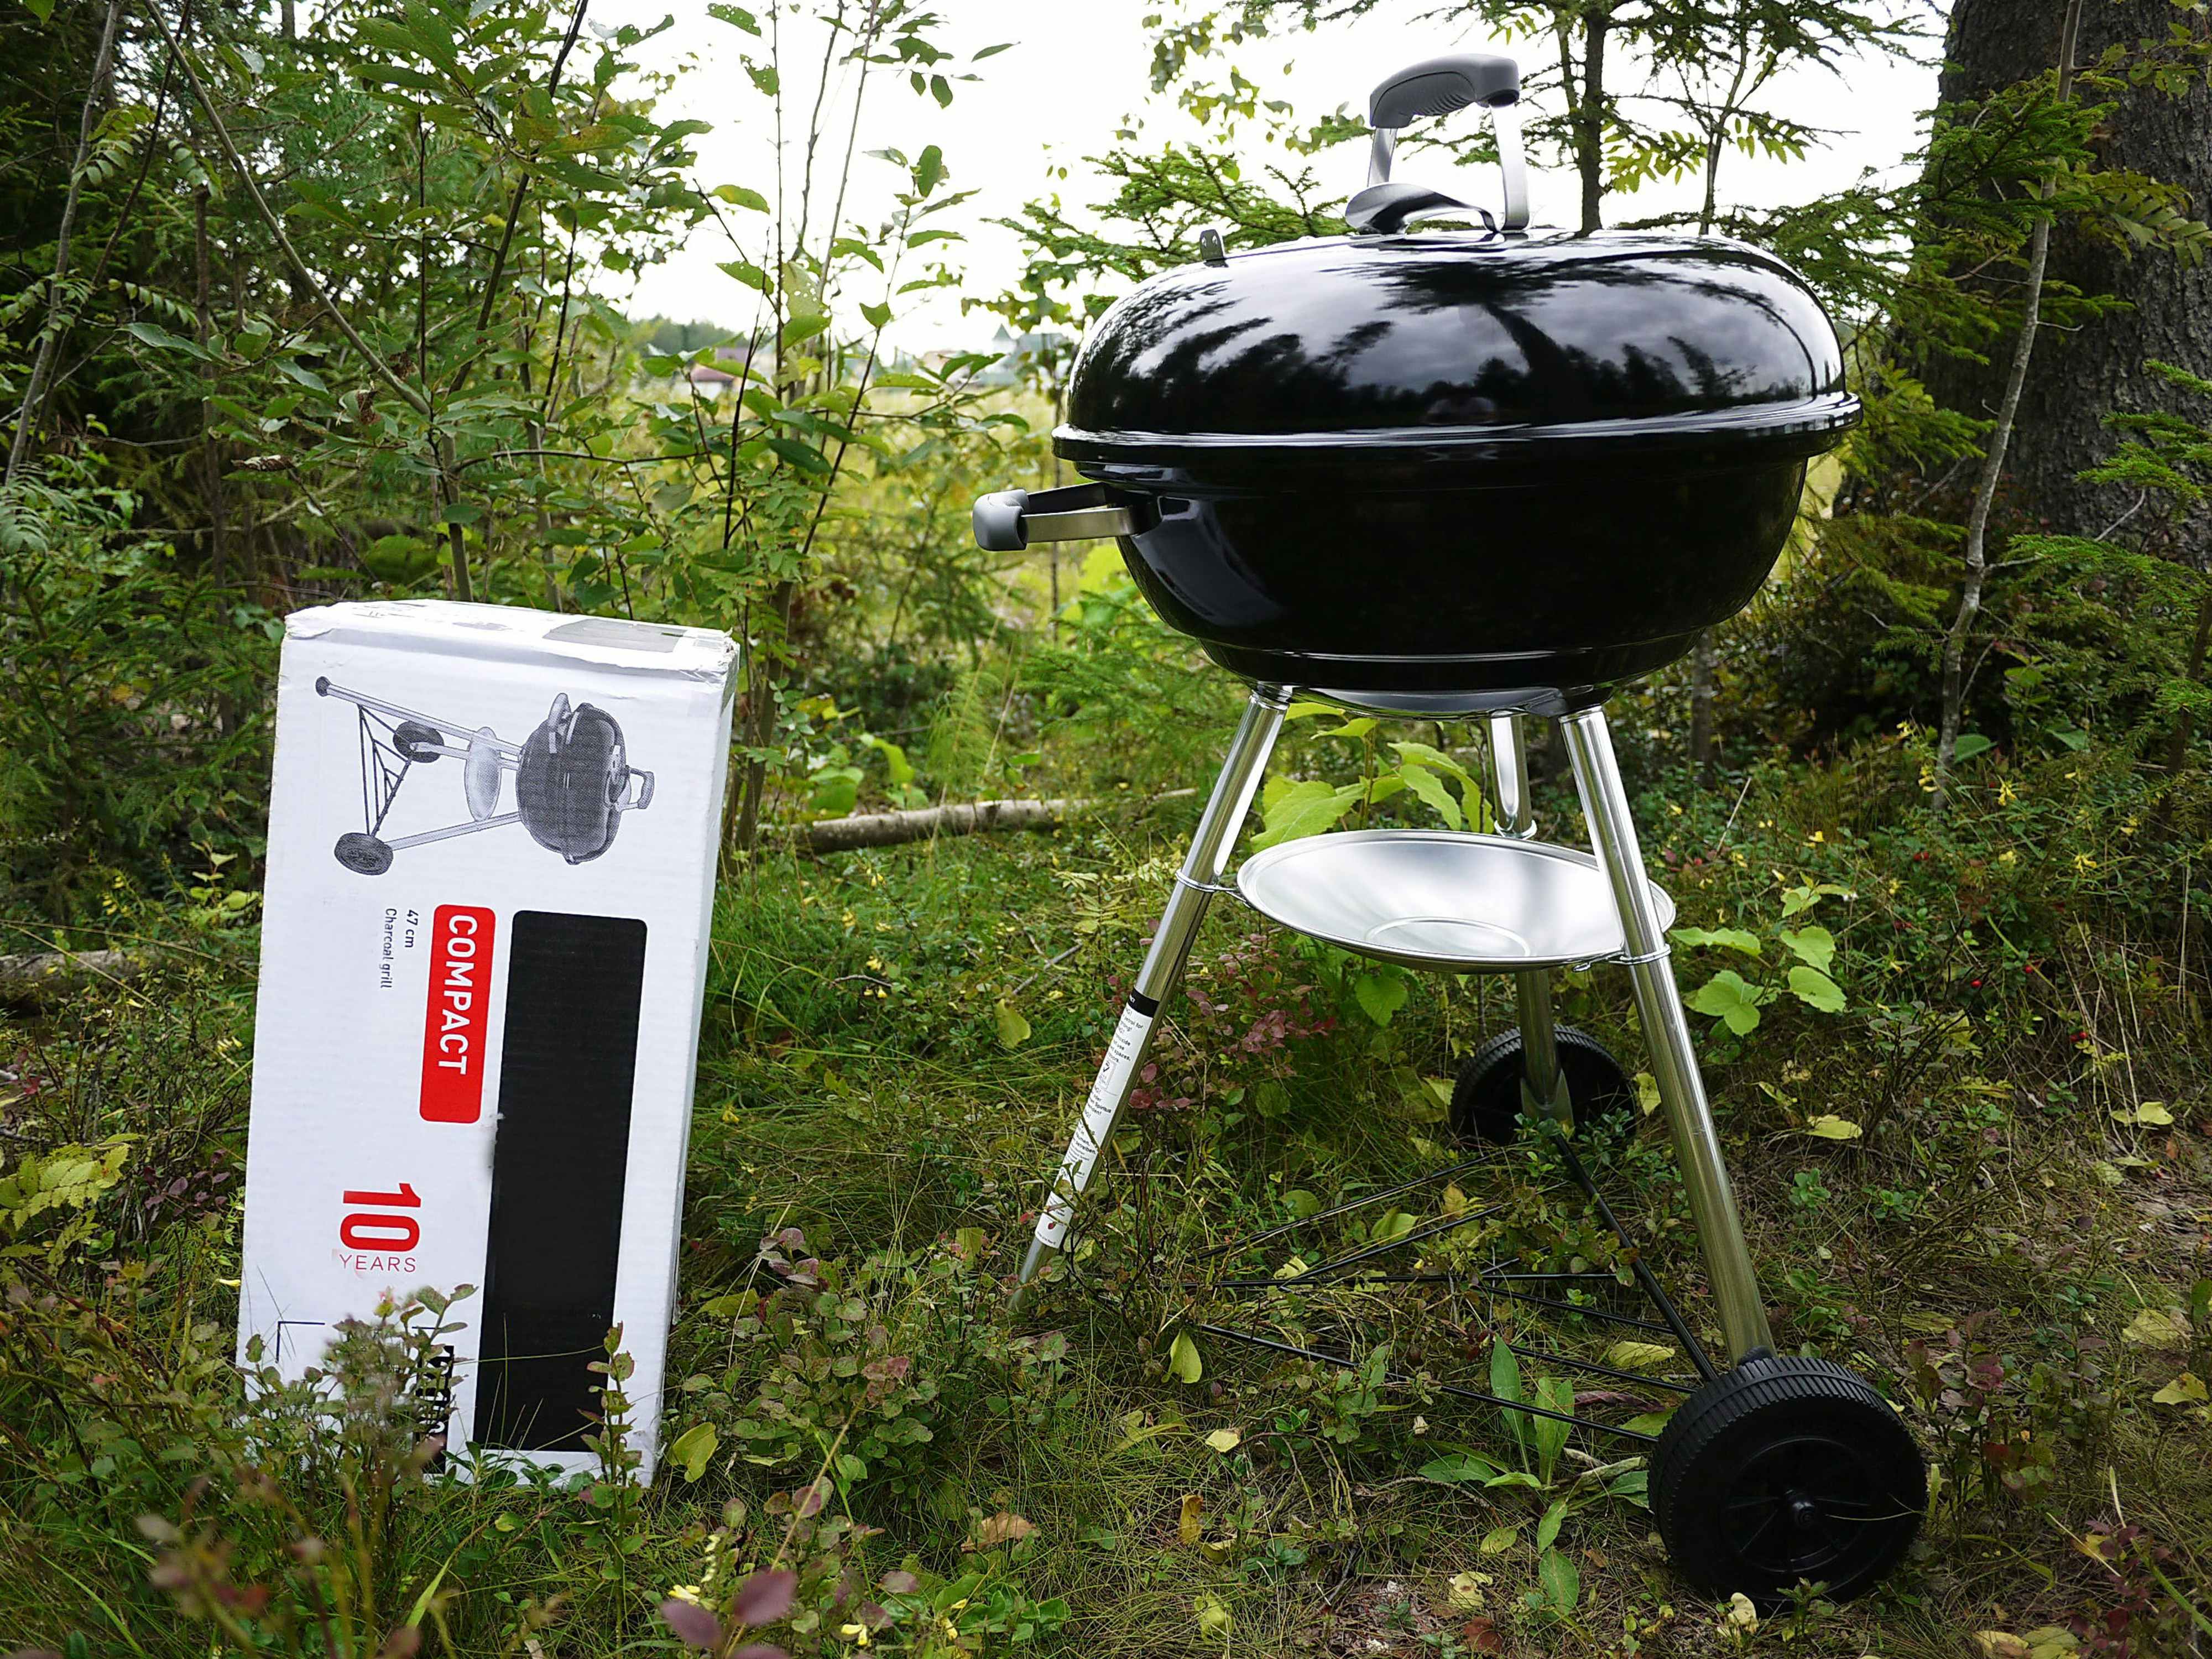 Black grill next to a box that says compact with a picture of the grill on it. The grill and box are outside surrounded by grass and trees.